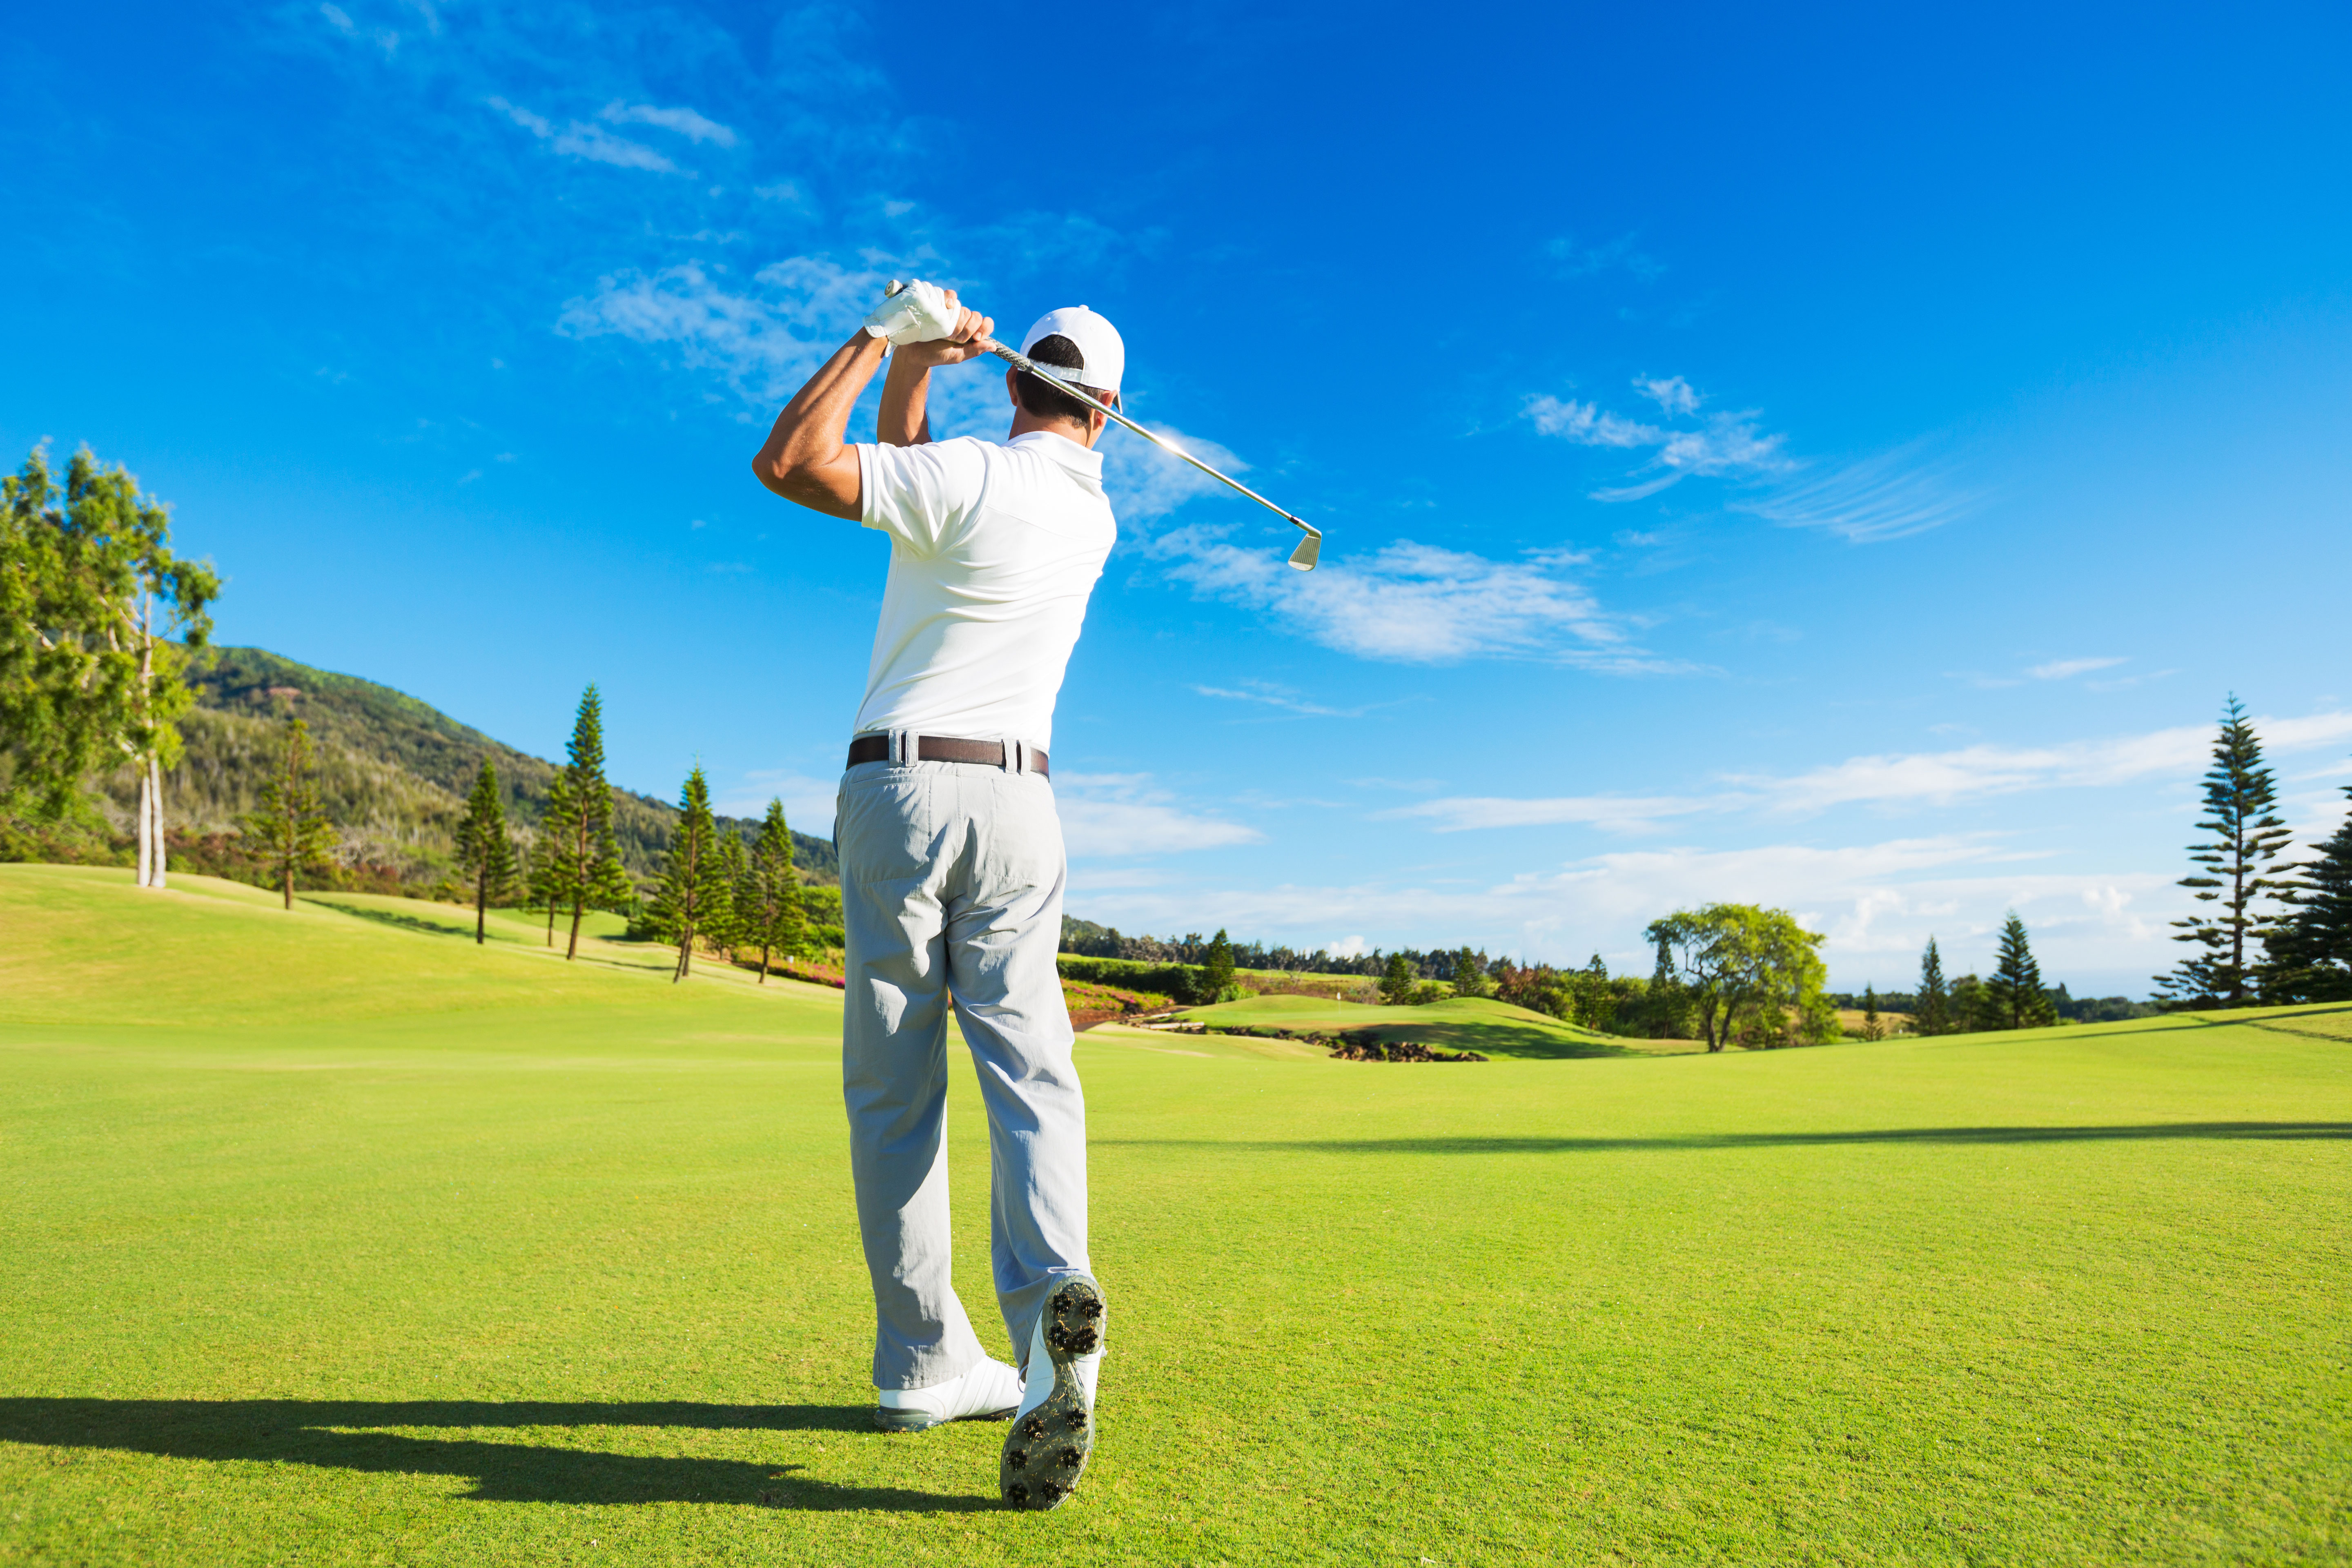 How to get the perfect impact position for your golf swing. Learn